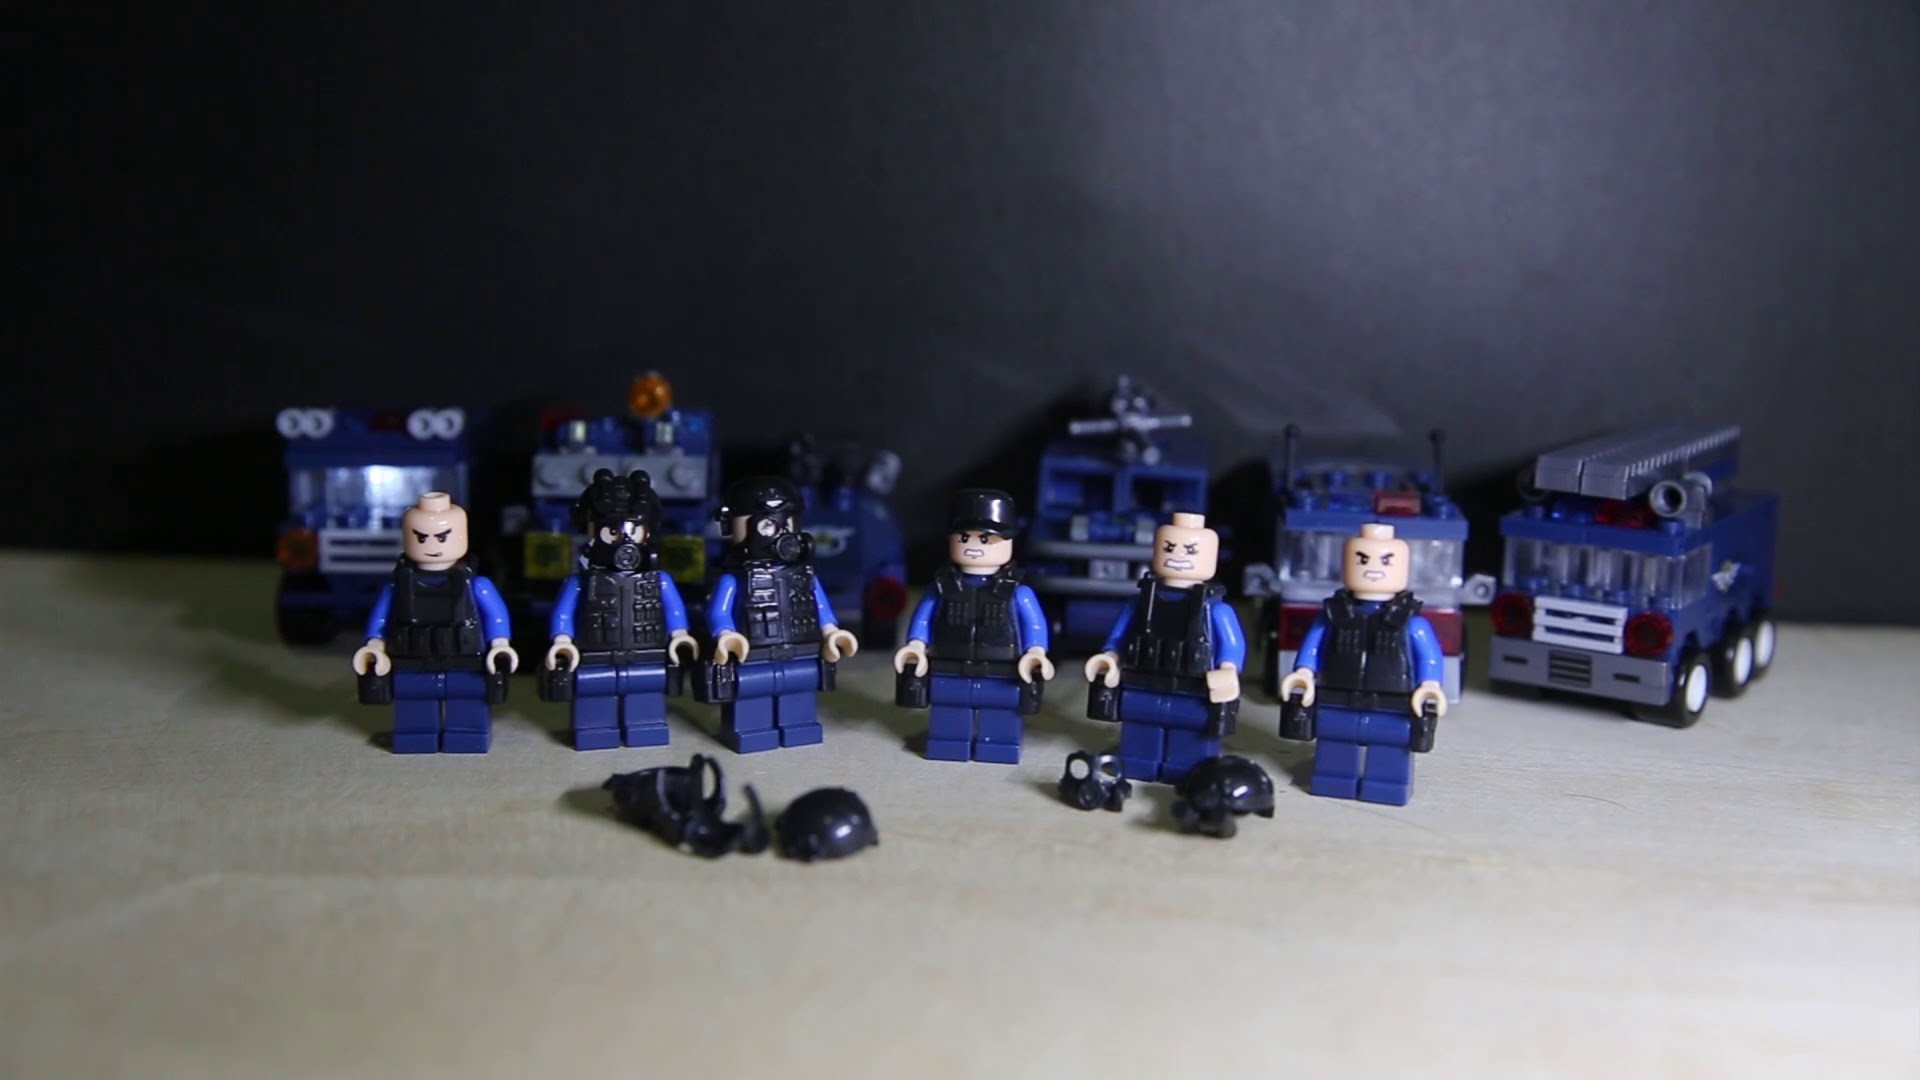 1920x1080 Lego Police Swat Team GBL Gal Boll Bootleg KY98501 KY98506 Review - YouTube